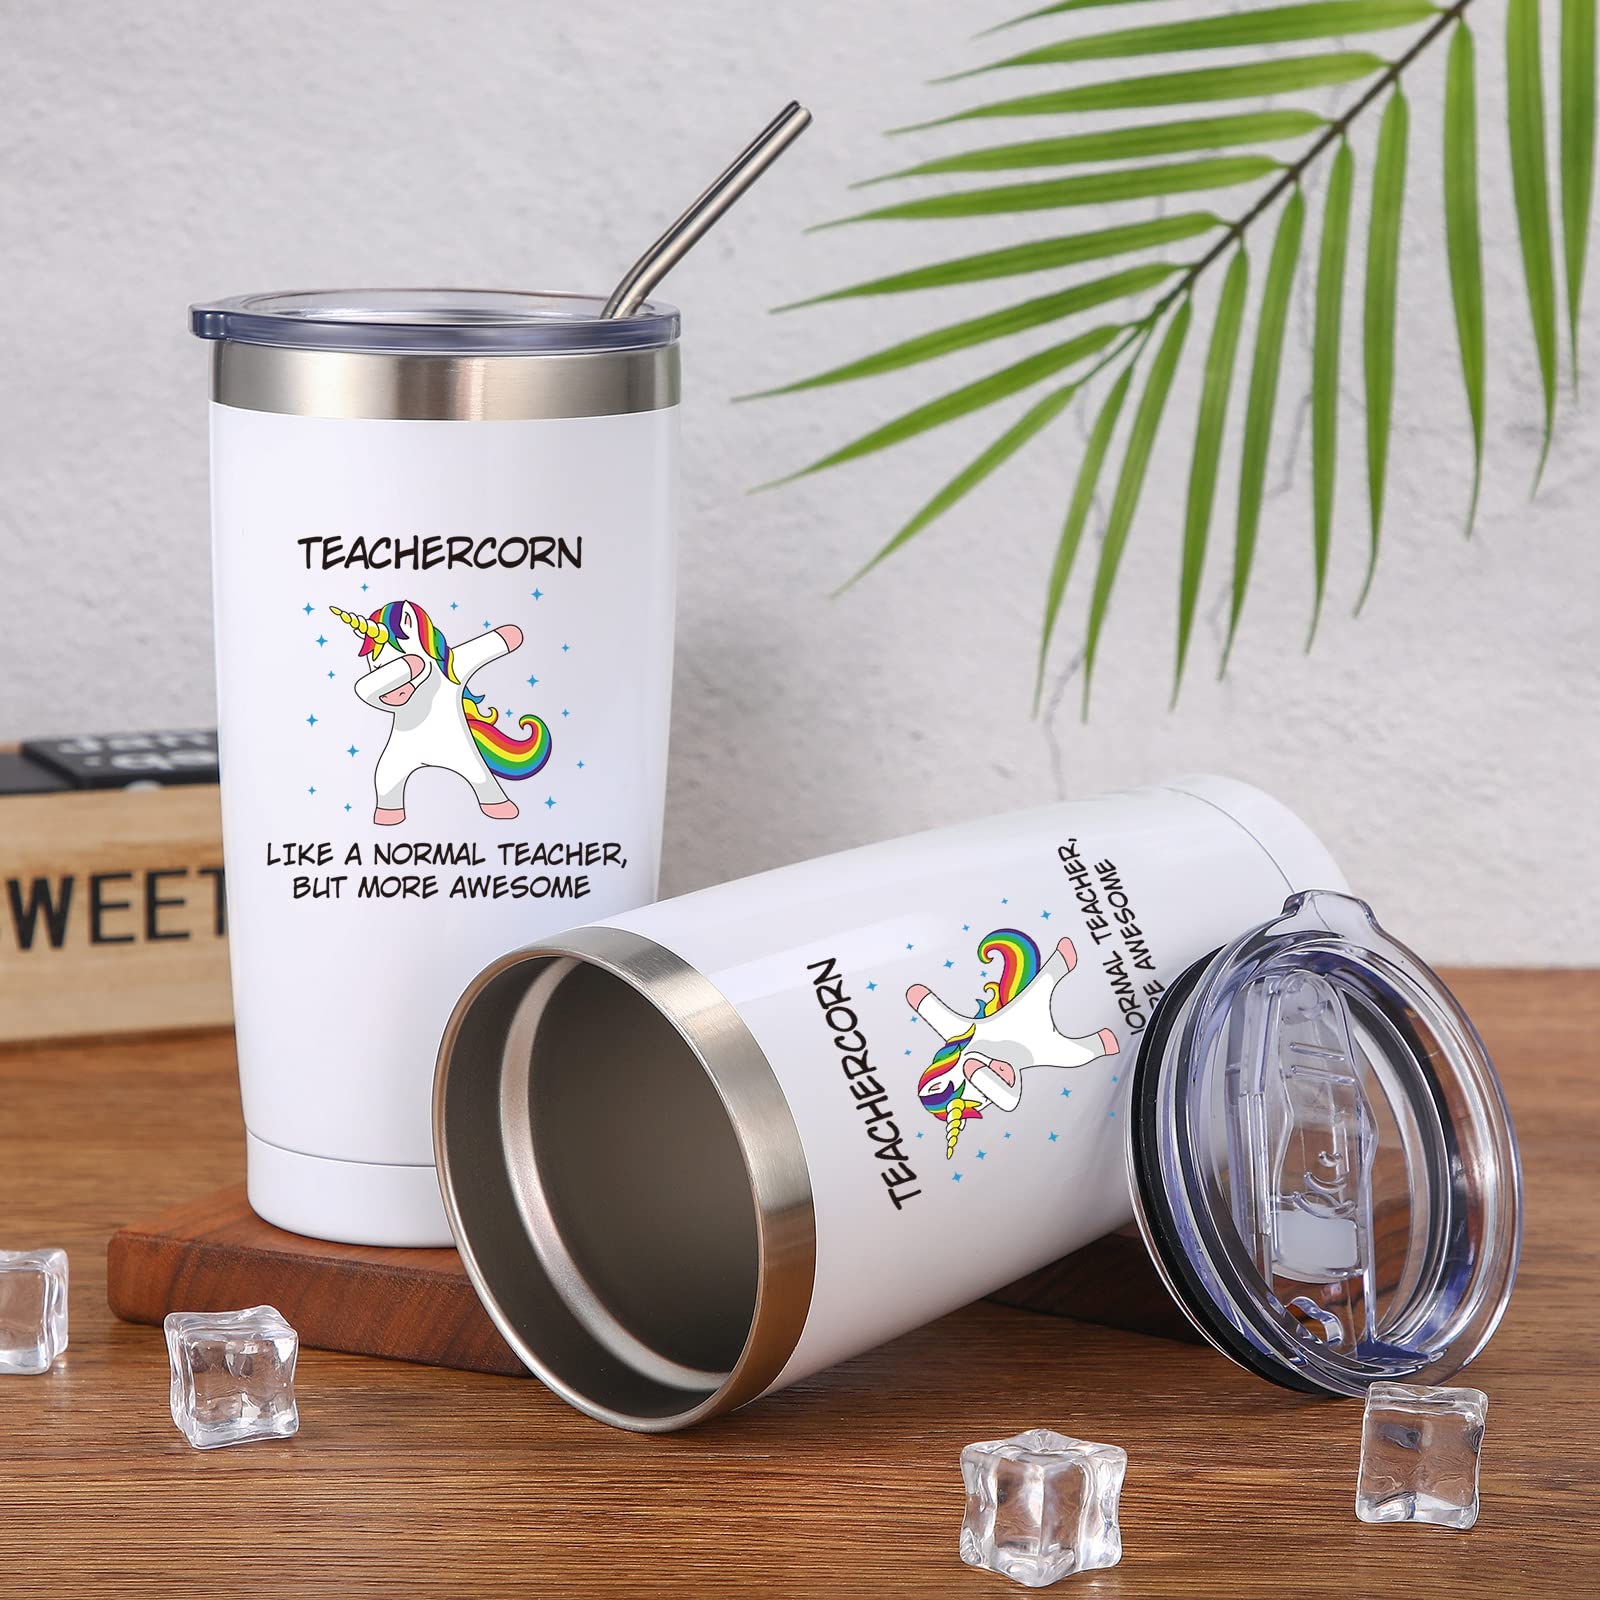 2 Pieces Teacher Unicorn Tumblers Teacher Graduation Gifts, Teacher Appreciation Gift Ideal for Teacher's Day Birthday, 20 oz Stainless Steel Travel Mugs with Lids Straws and Brushes (White)